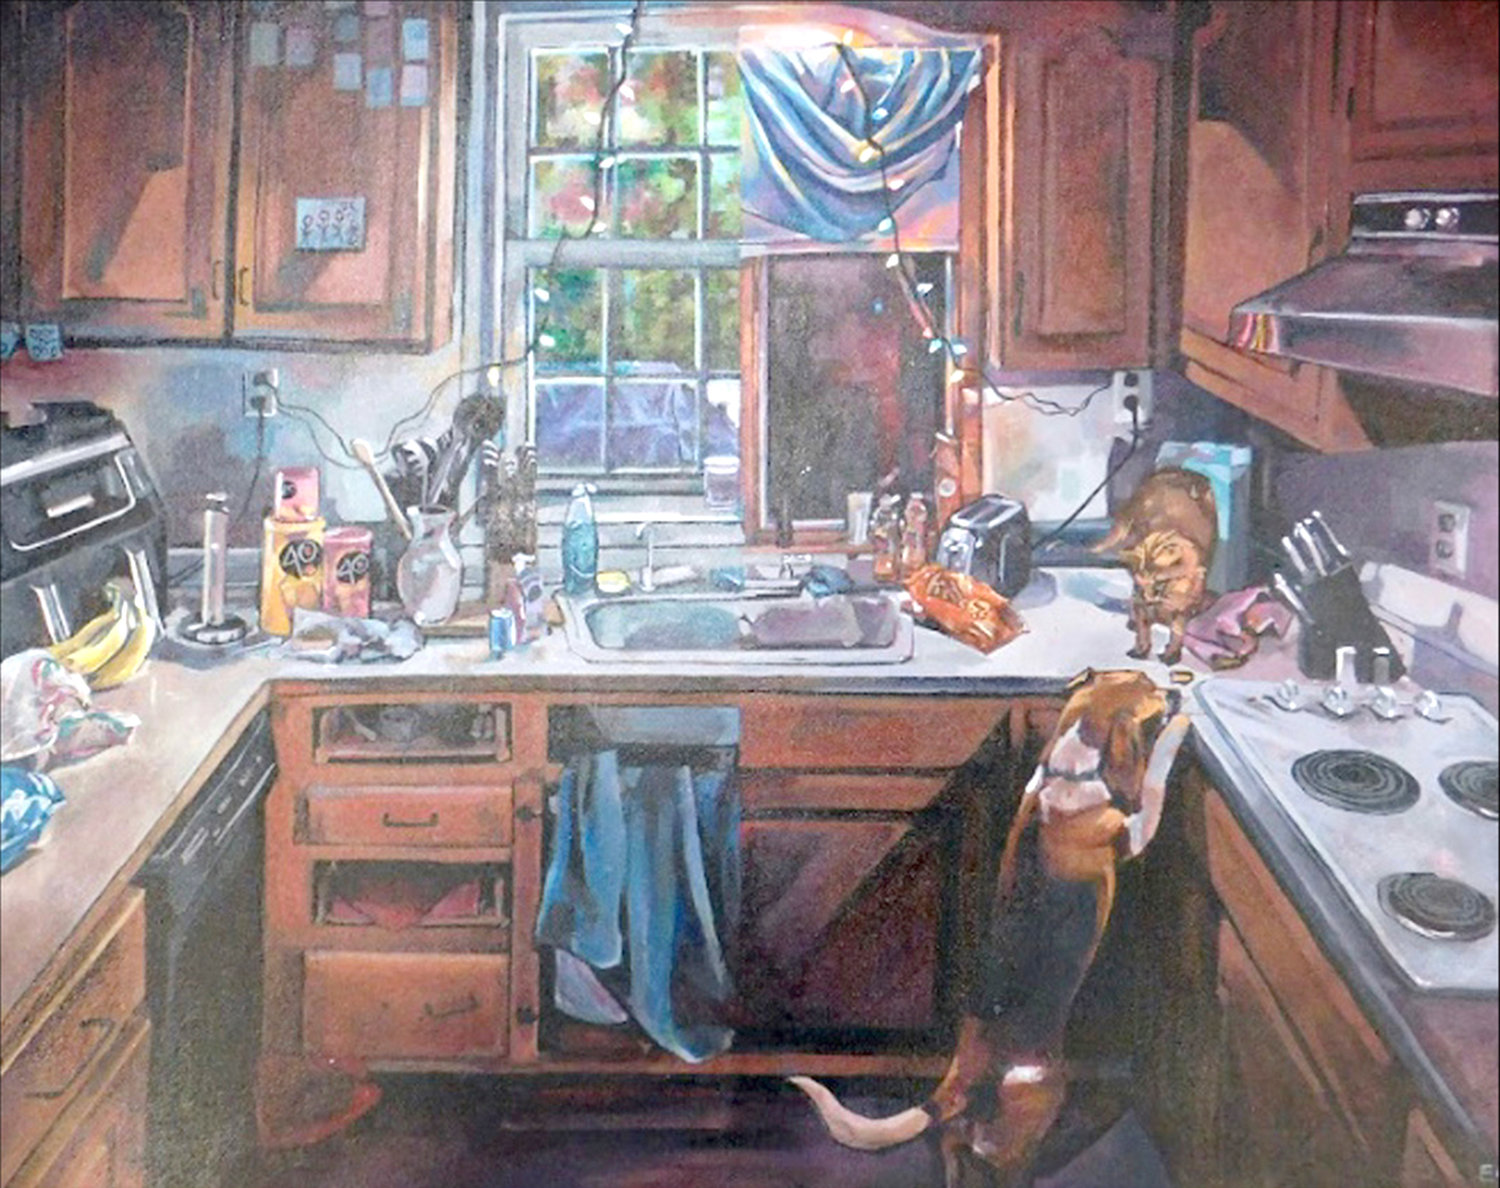 Emily Carlson of Holland Patent earned The Art Store Award for Best Painting and an American Visions Award for this painting titled “6 O’Clock on a Sunday Night.”